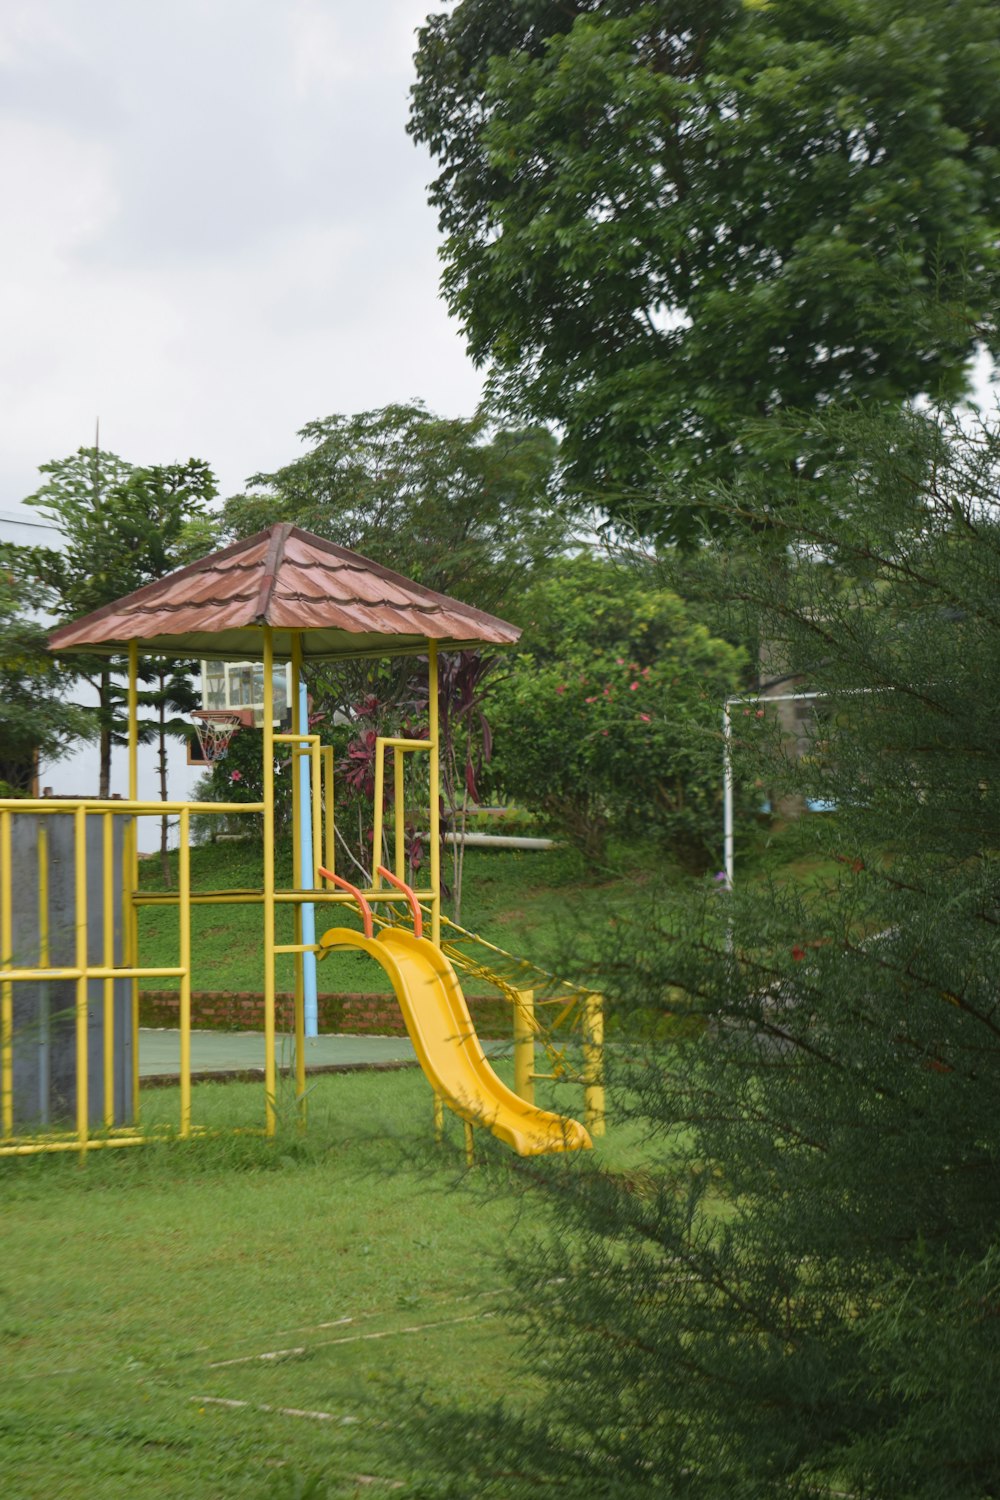 a playground with a yellow slide in the grass